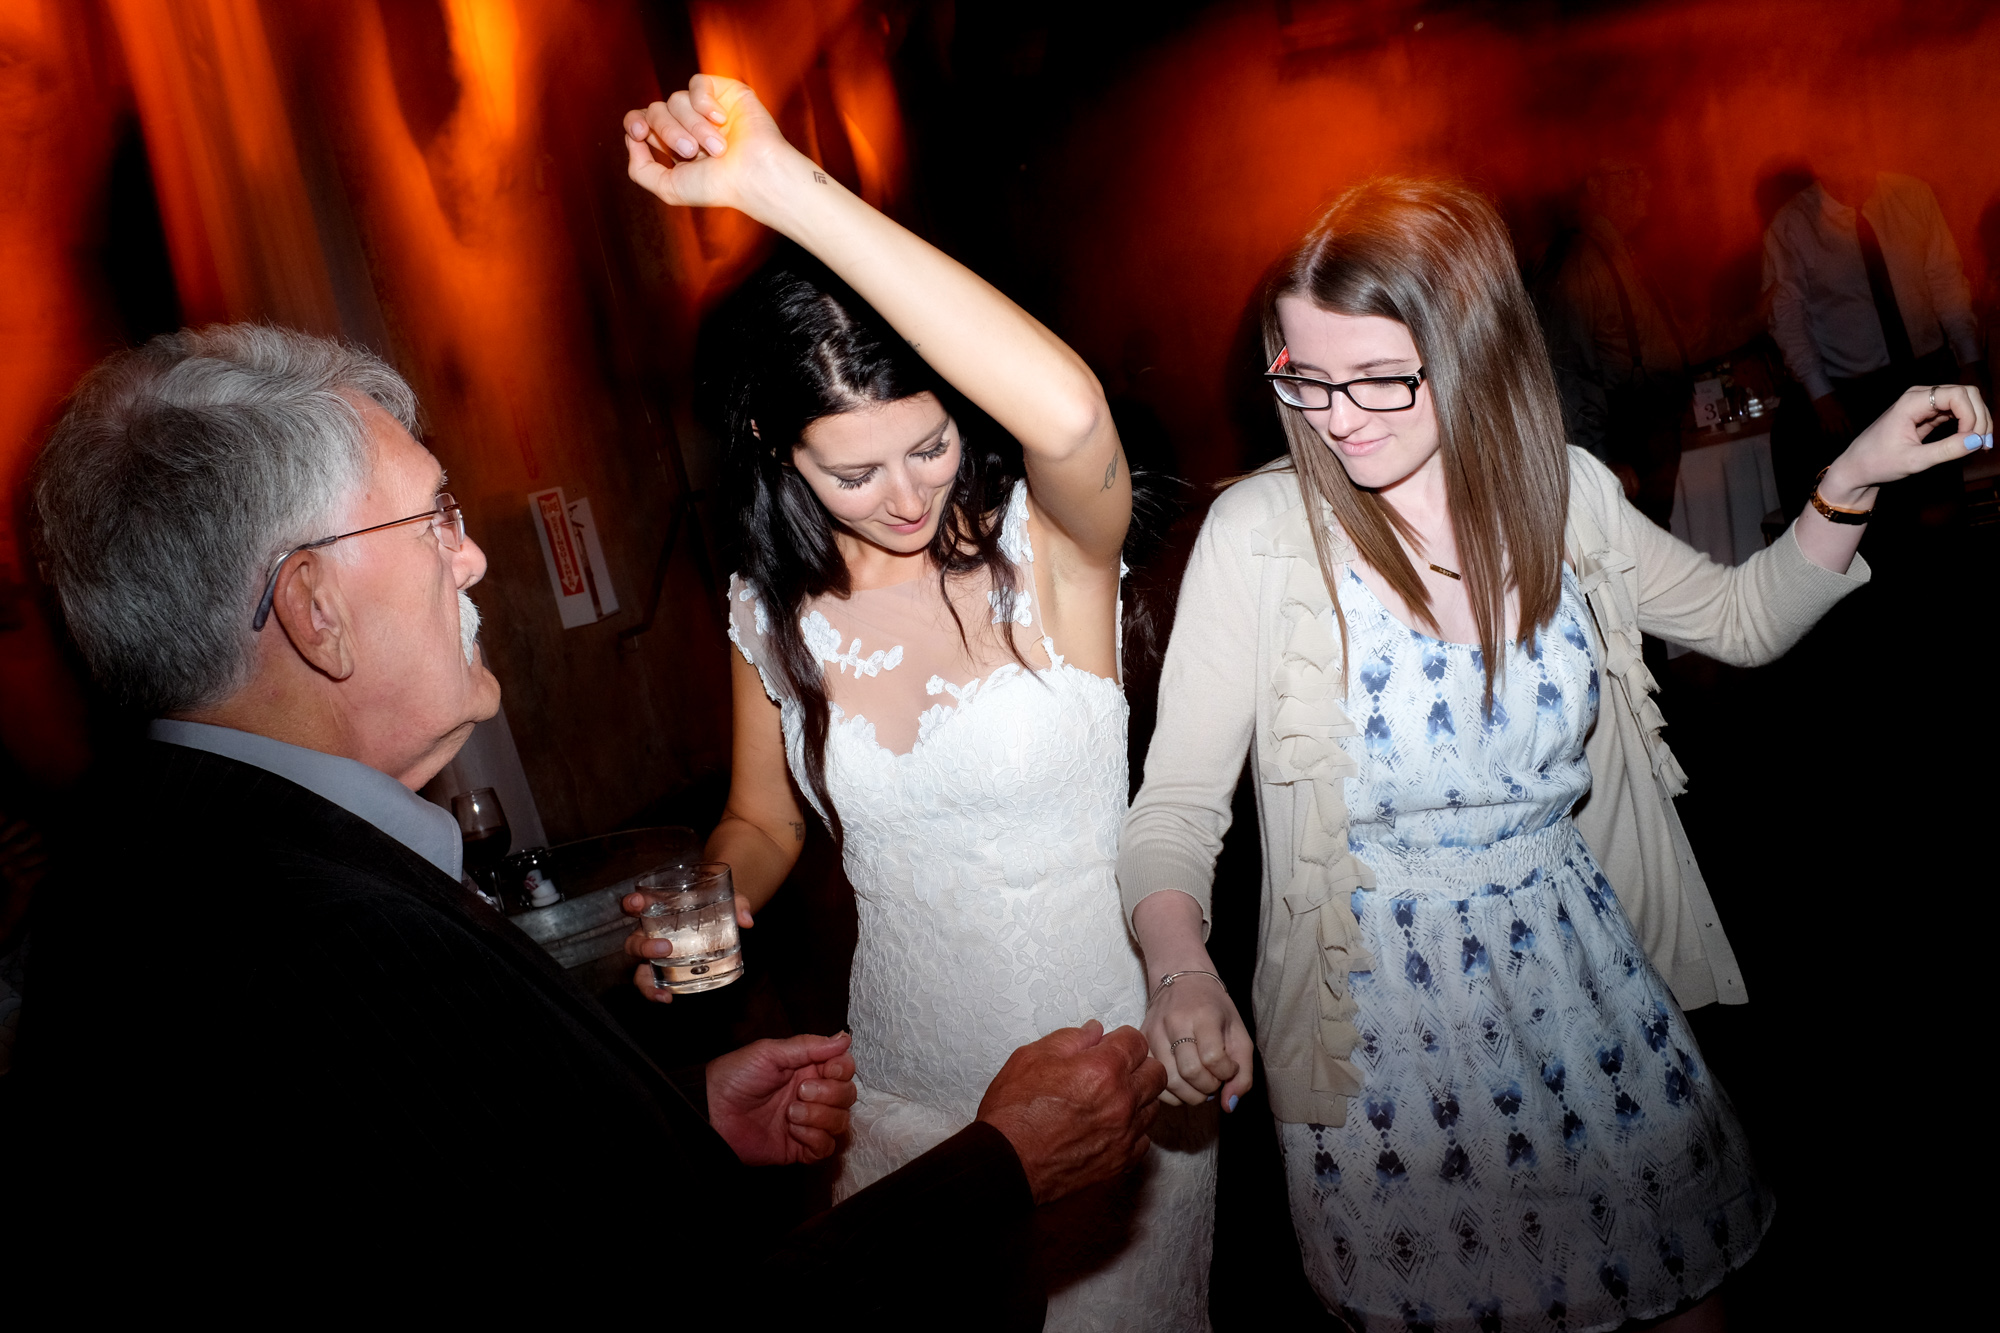  Guests dance and party during the wedding reception at the Fermenting Cellar.&nbsp; 